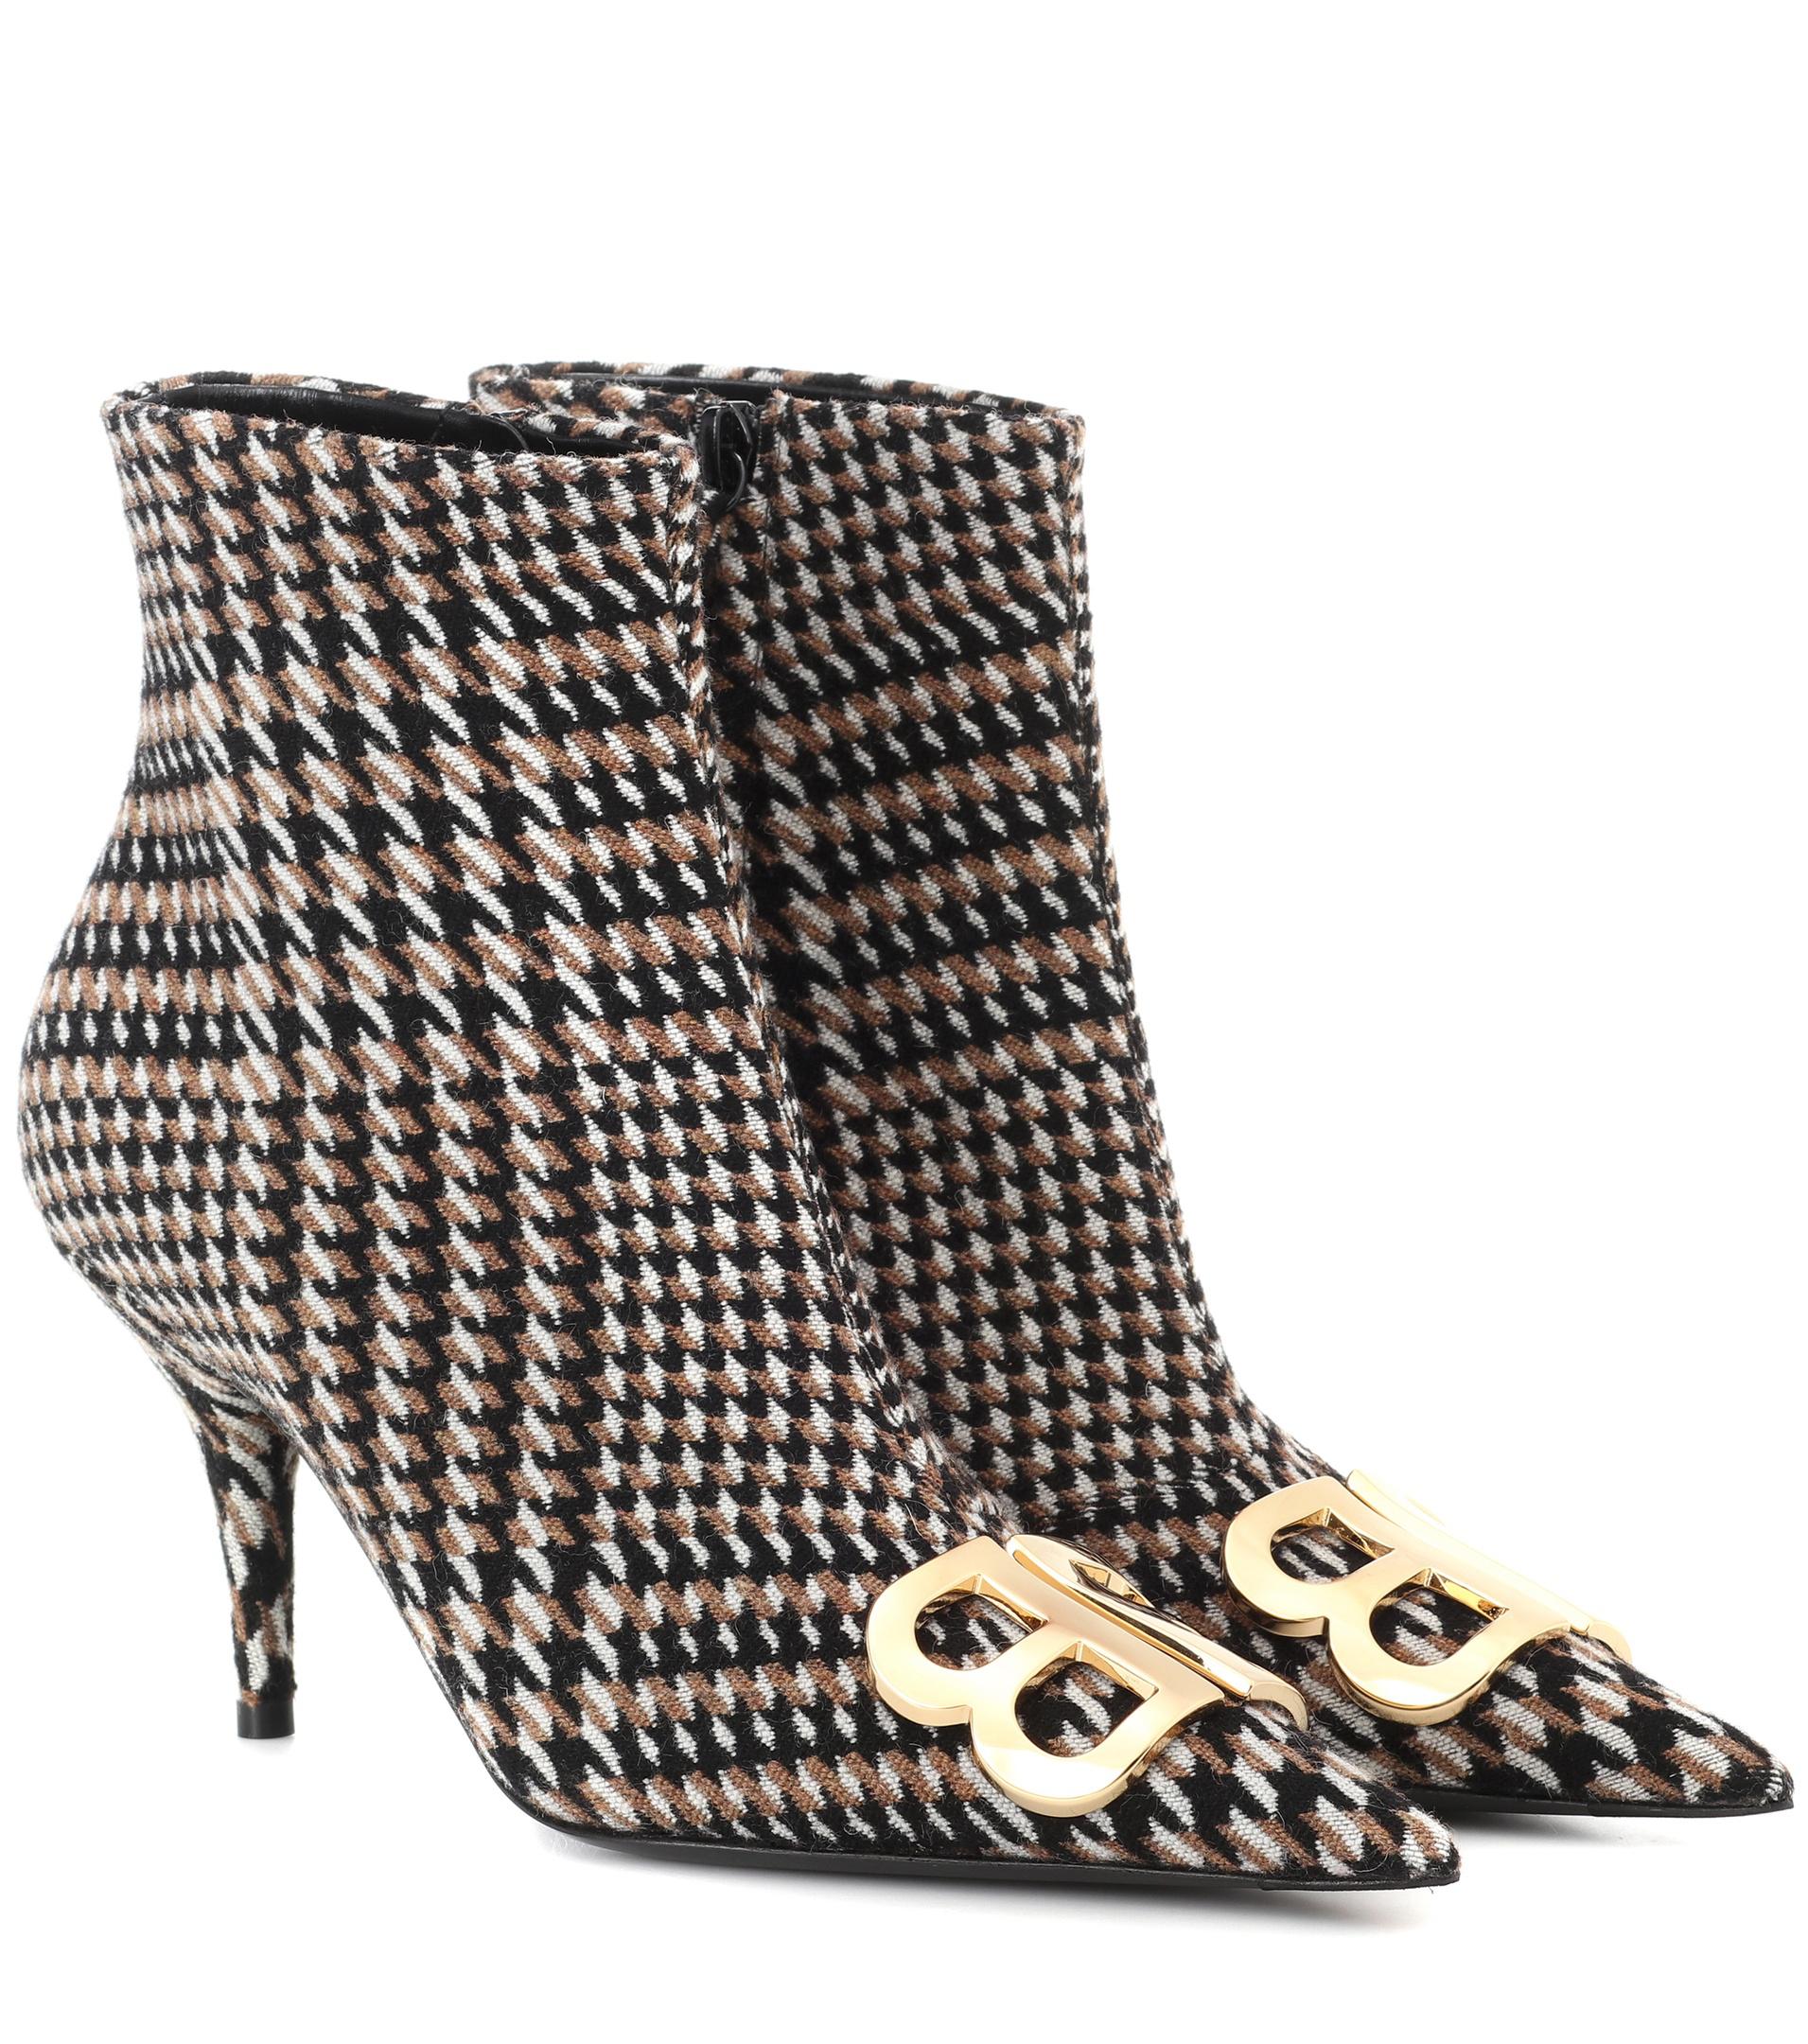 Balenciaga Leather Bb Houndstooth Ankle 